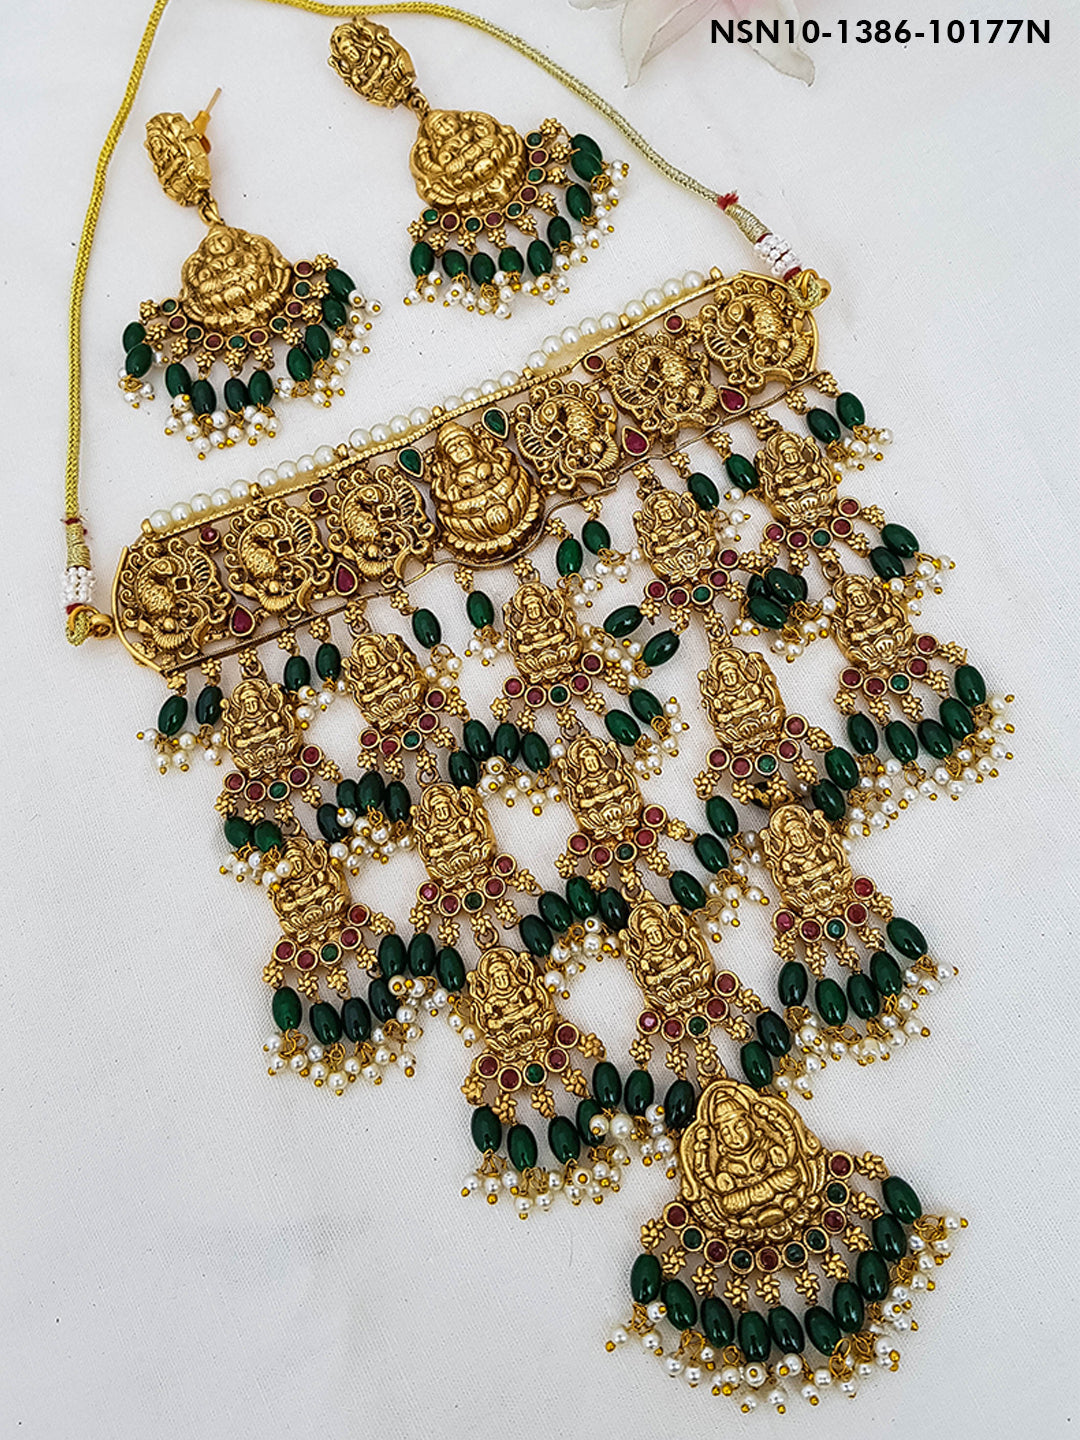 Premium Gold Plated Long Bridal Necklace Set with Stones 10177N